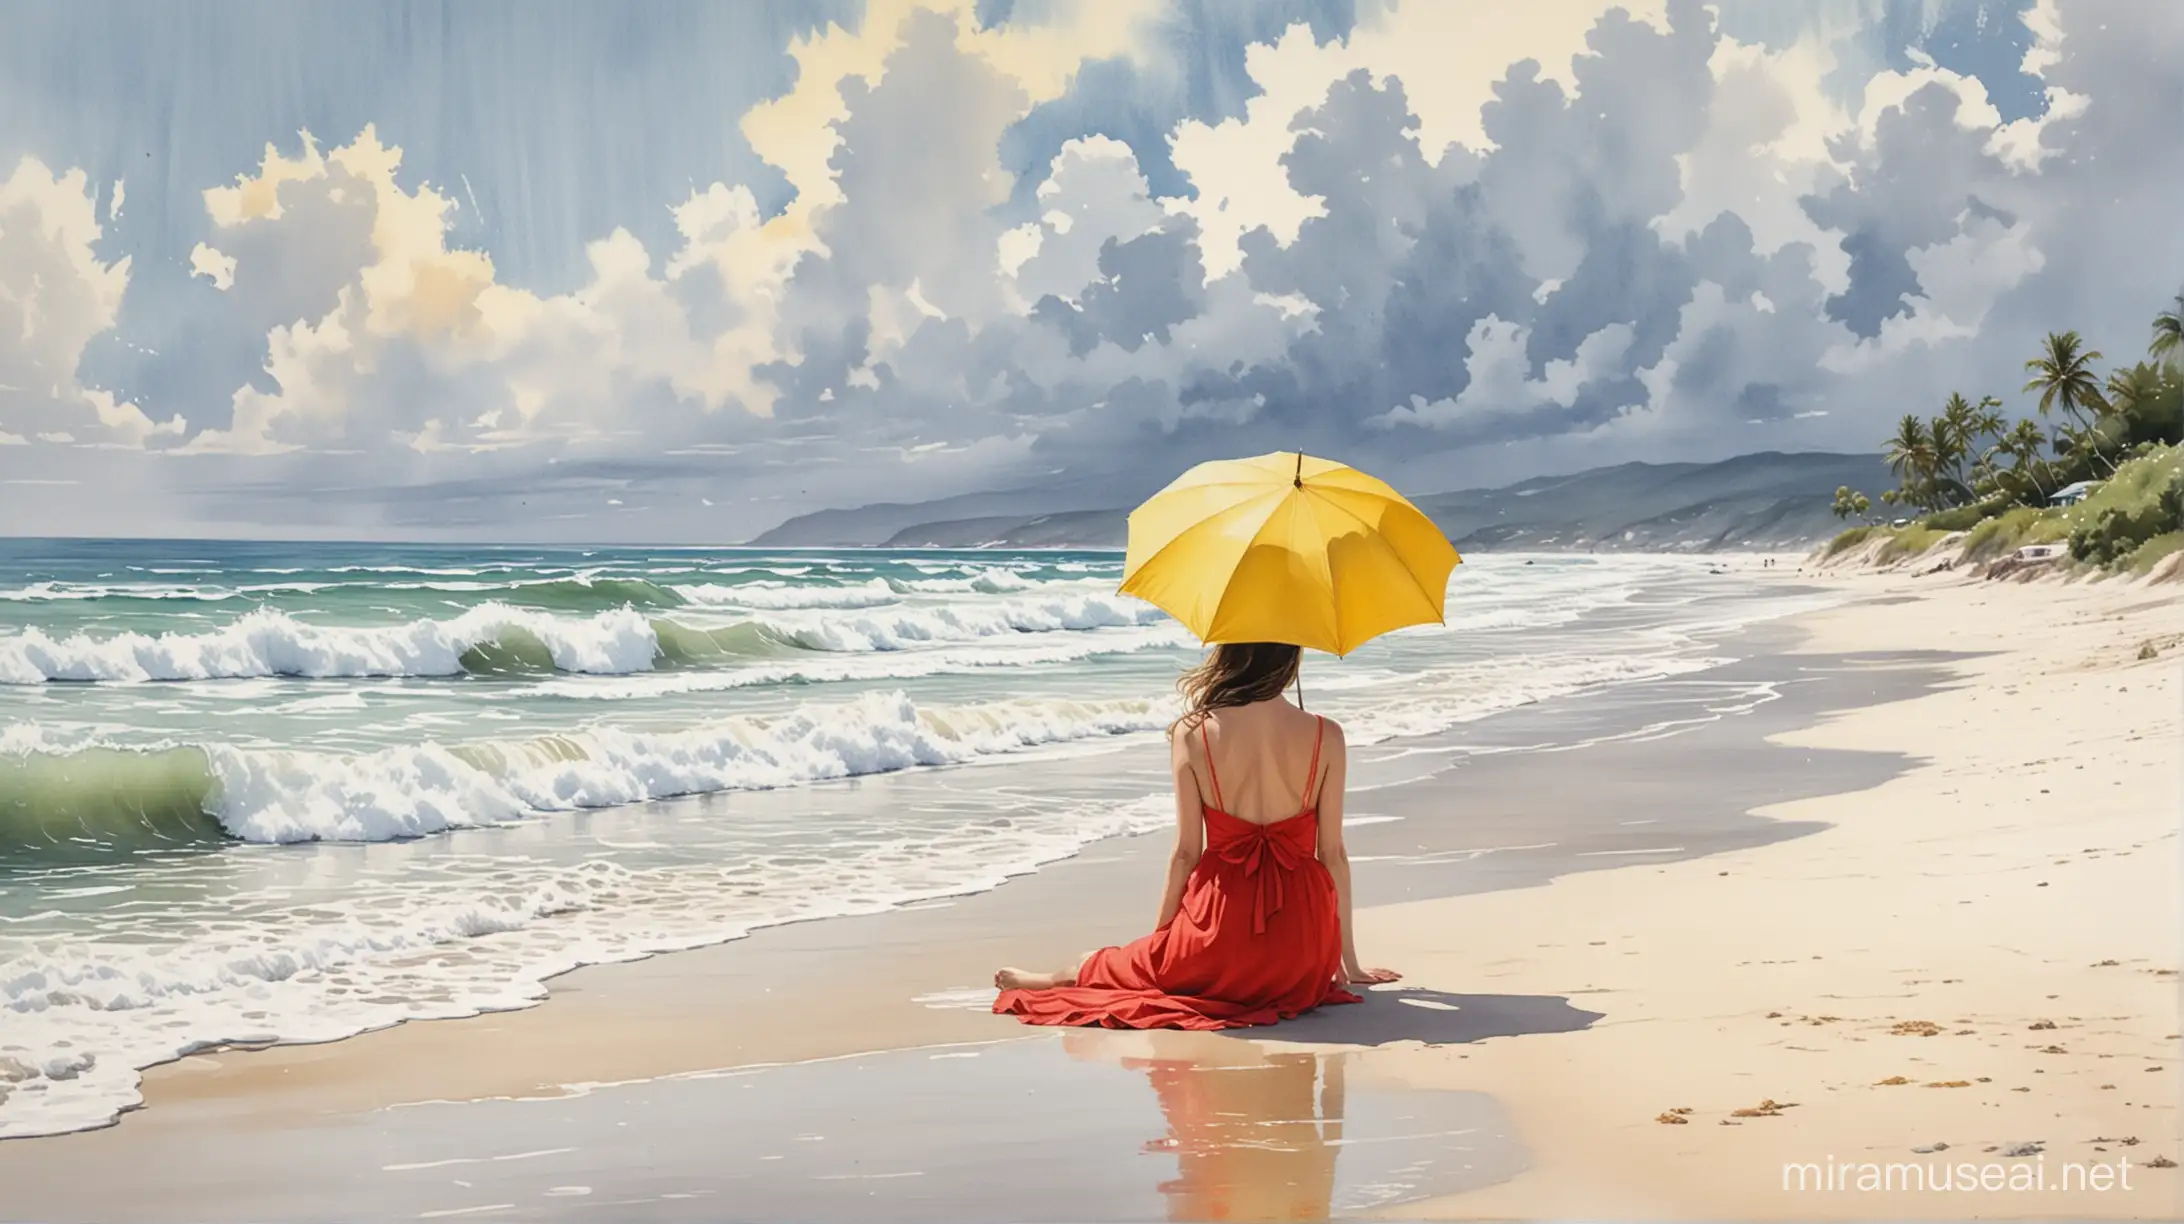 a water color painting of a panoramic view of the ocean with soft white sands in the front and a lady in a bright red dress sitting on the beach looking at the waves crashing with a yellow umbrella over her shoulder